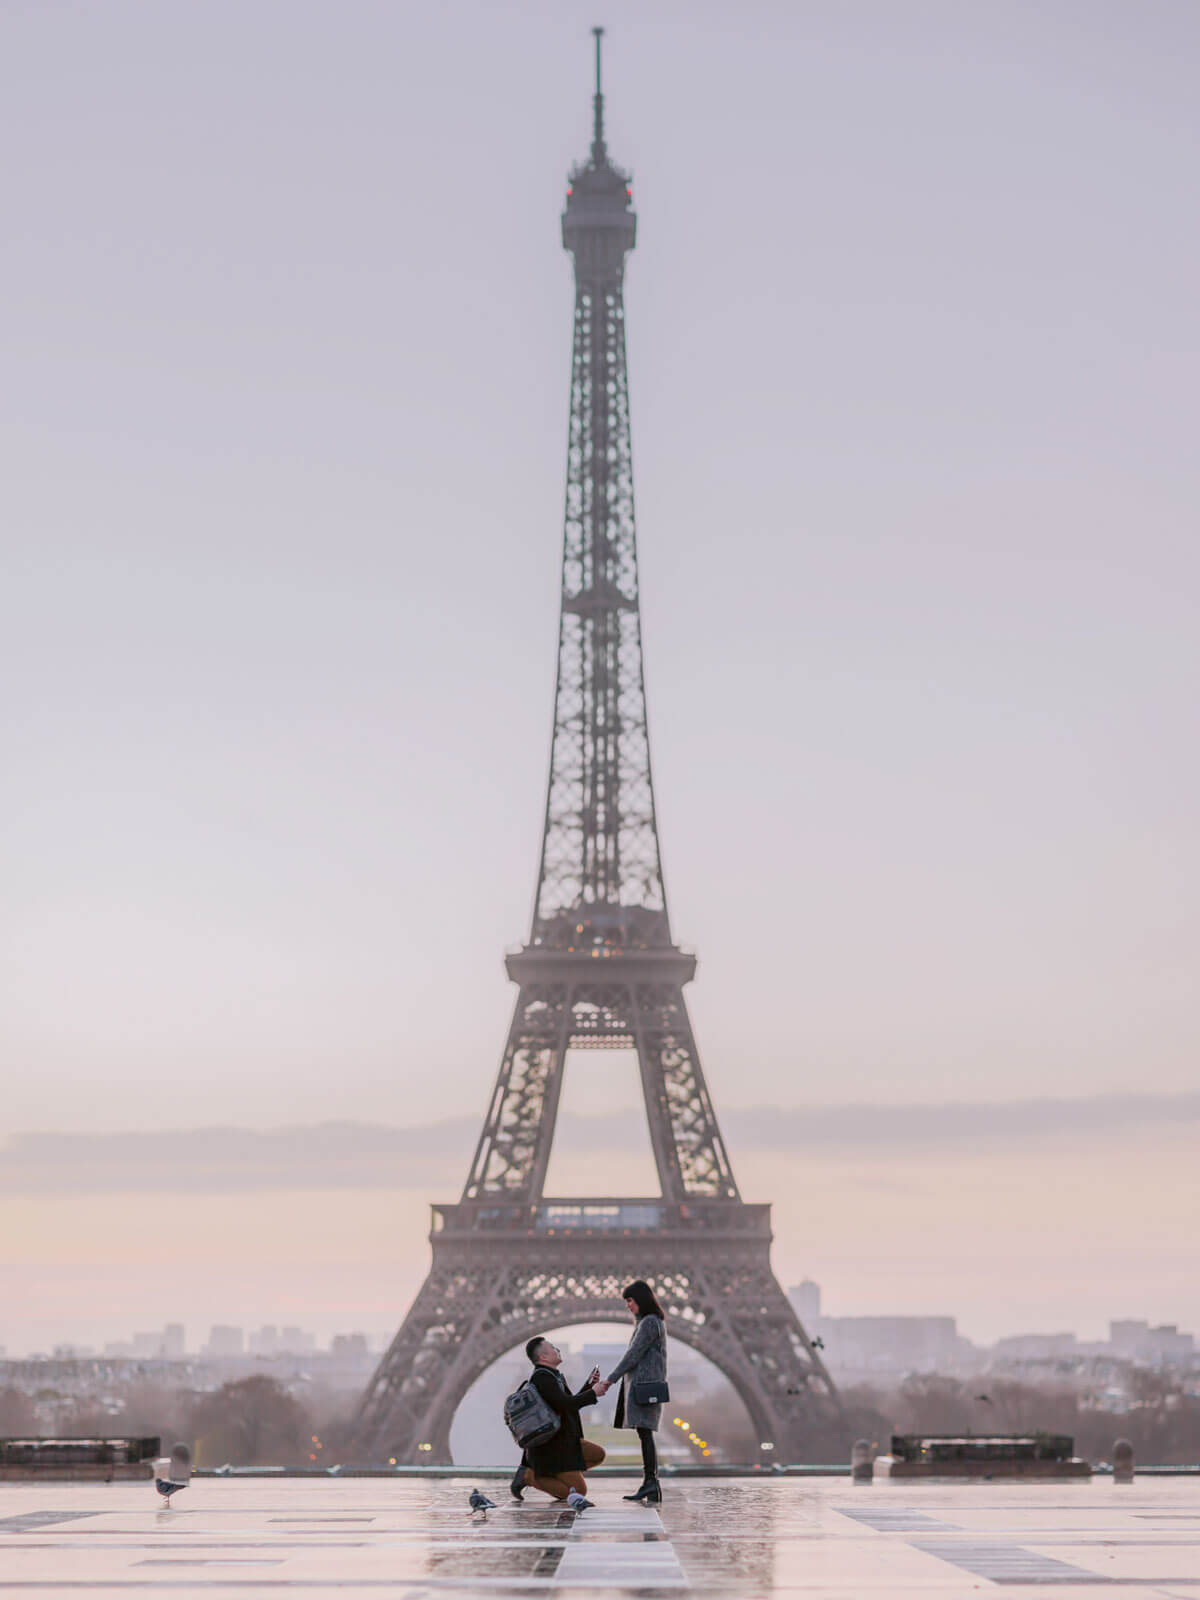 The man is on bended knees, proposing to his fiancee in front of the Eiffel Tower, Paris, France. Image by Jenny Fu Studio